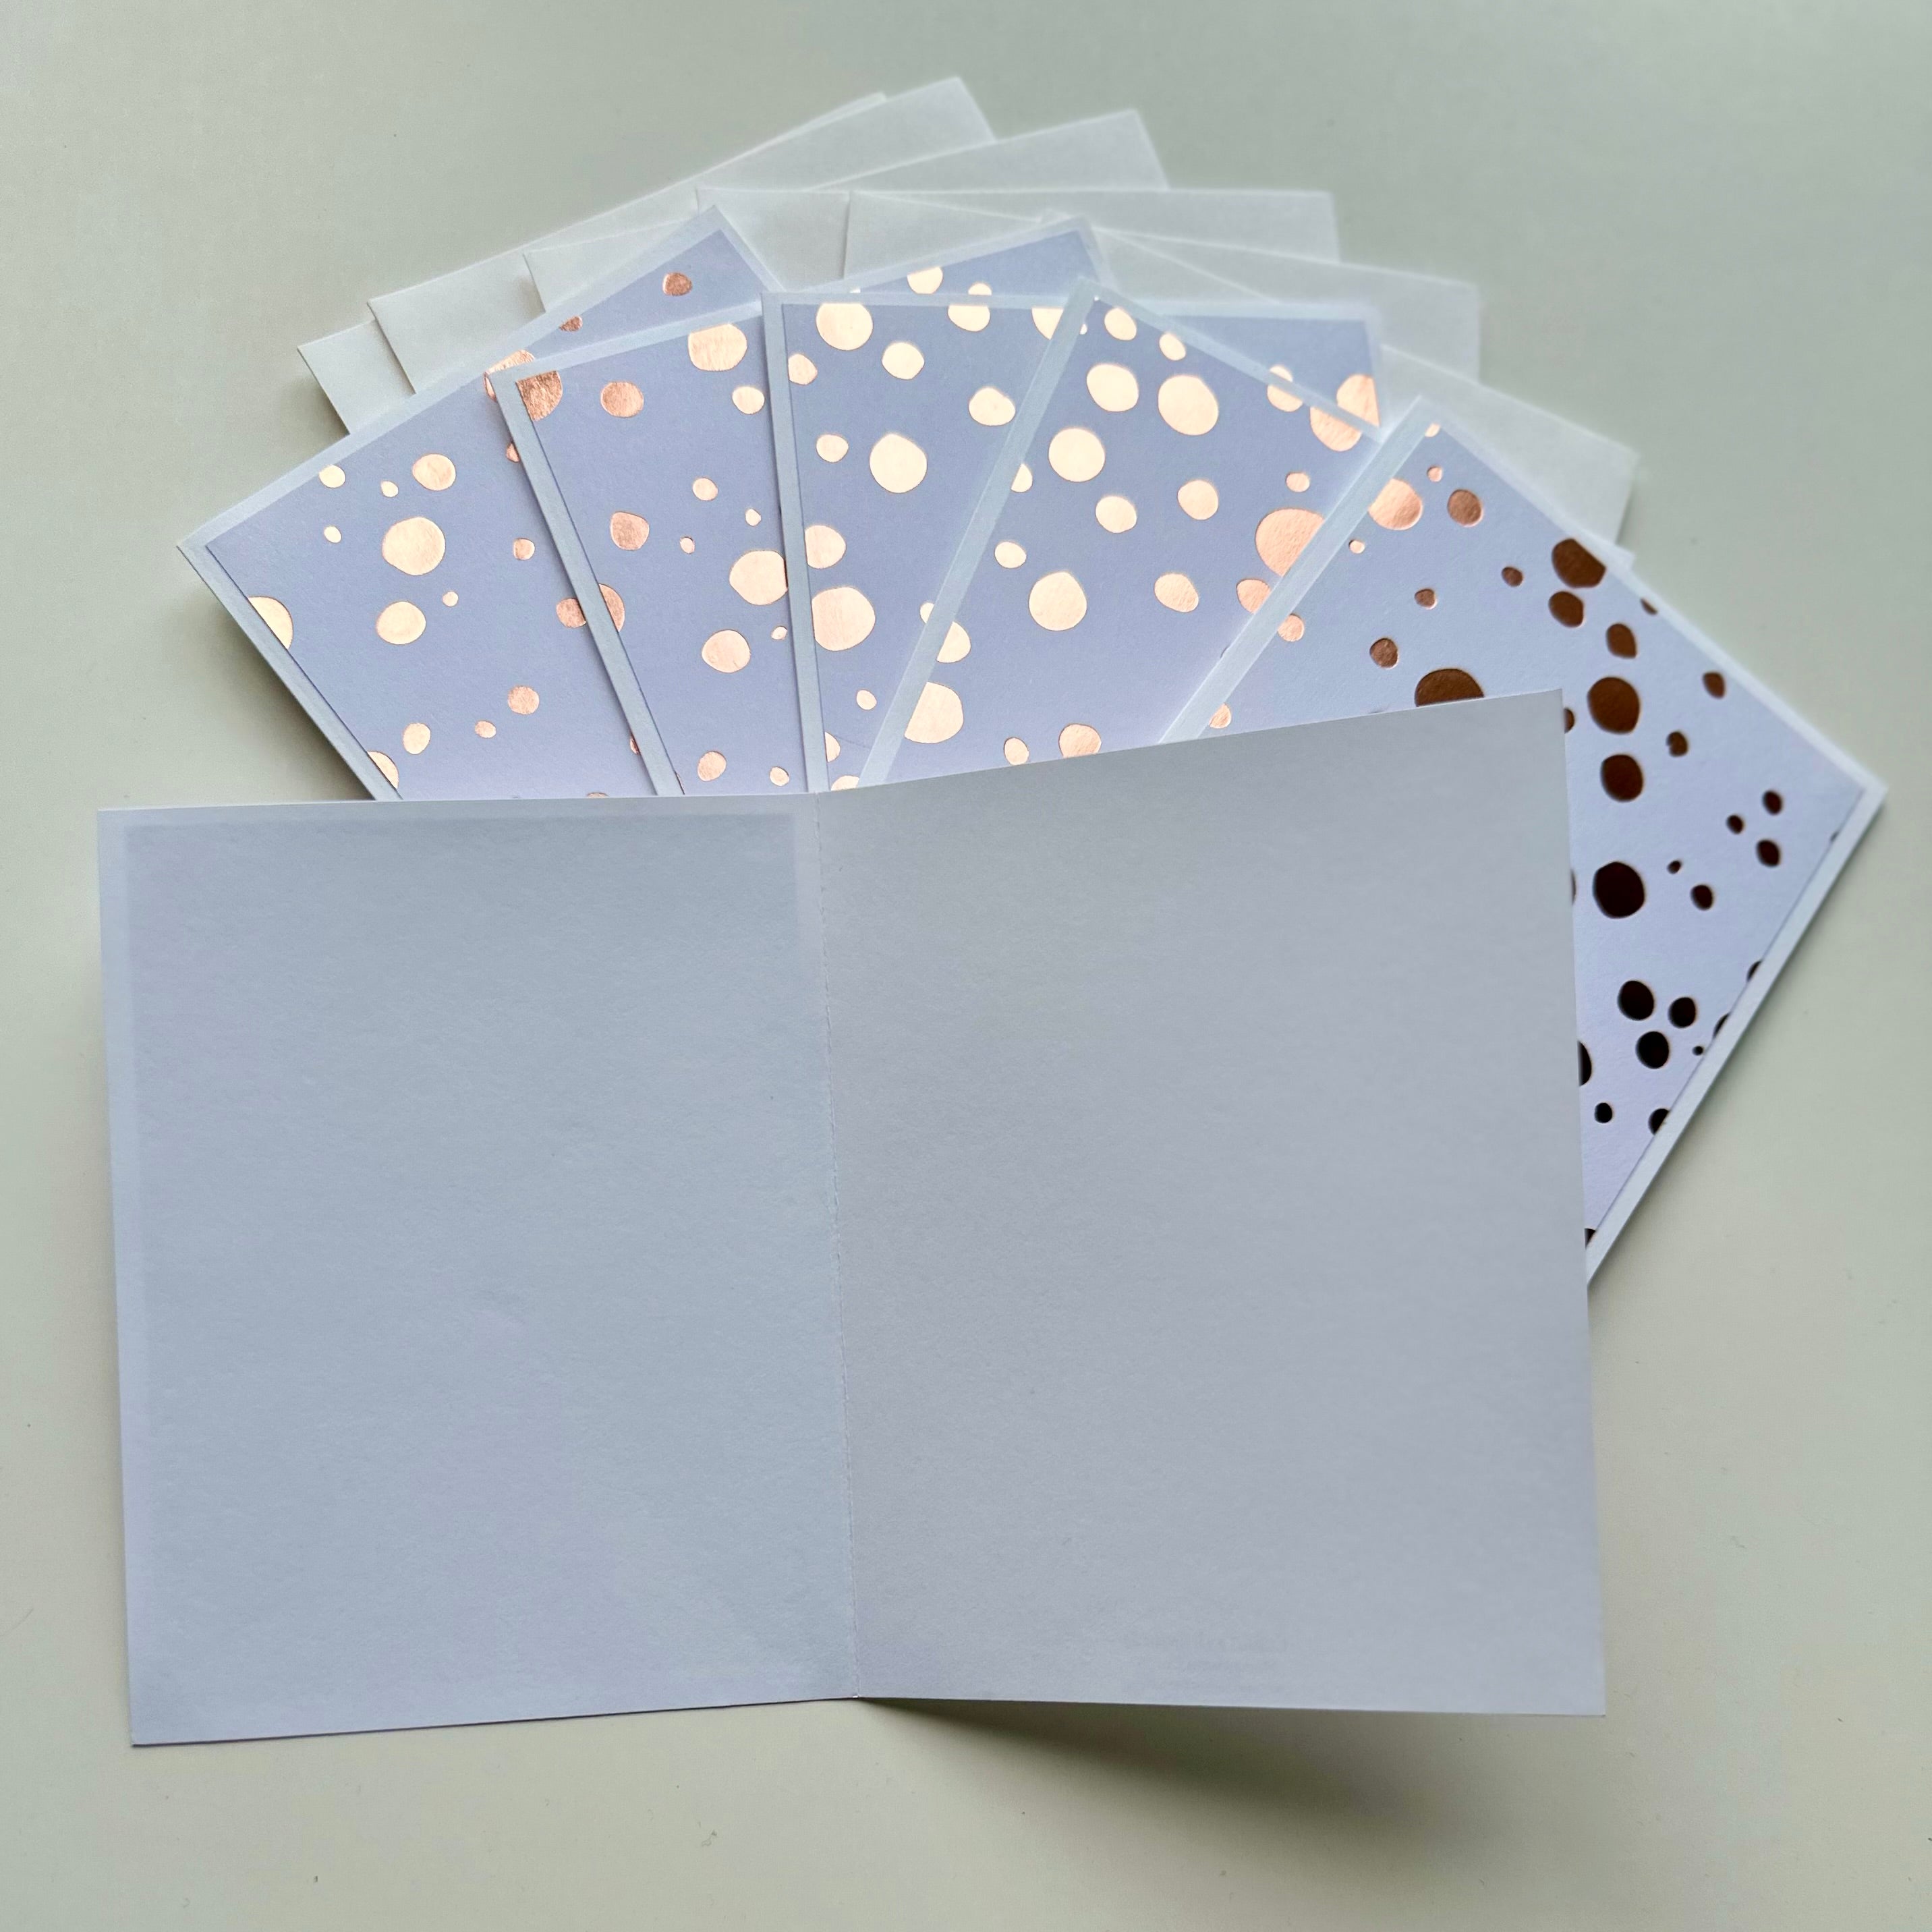 Set of 6: Handmade Cards | Beautiful Rose Gold Cards Set with Envelopes | Thank You Cards Set | Greeting Cards Set